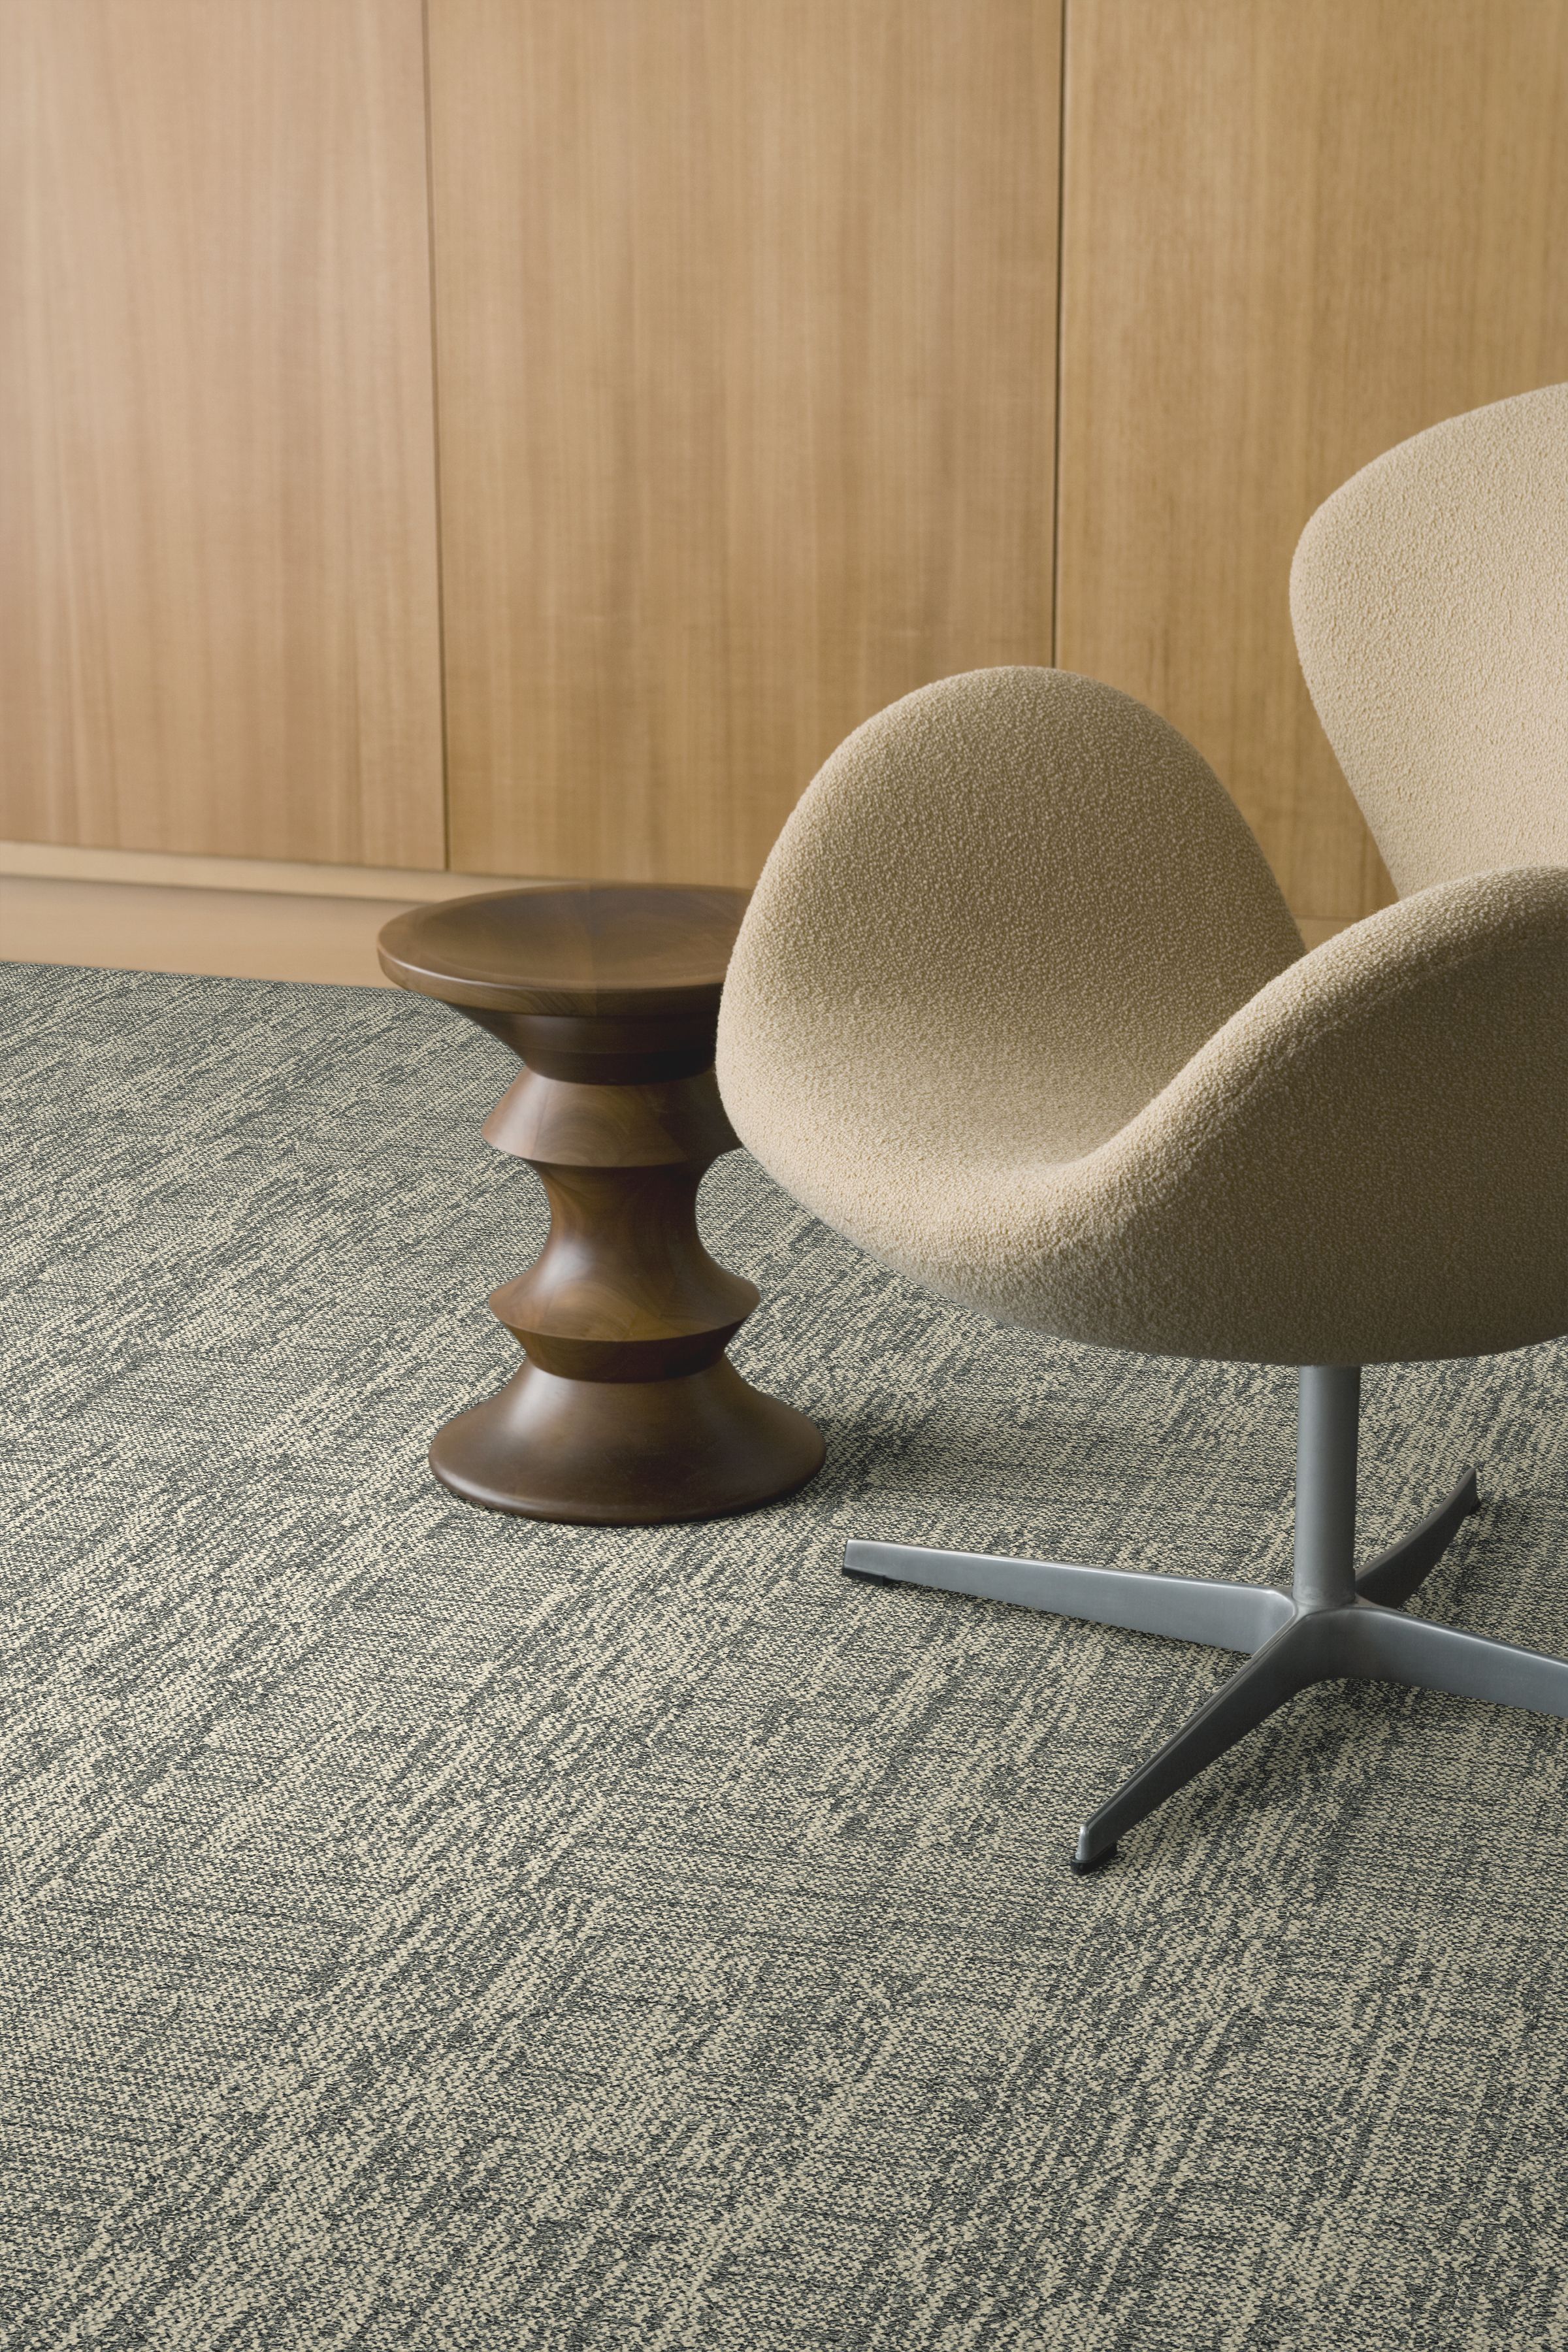 Interface Intermedio plank carpet tile in meeting room with four chairs and table imagen número 2